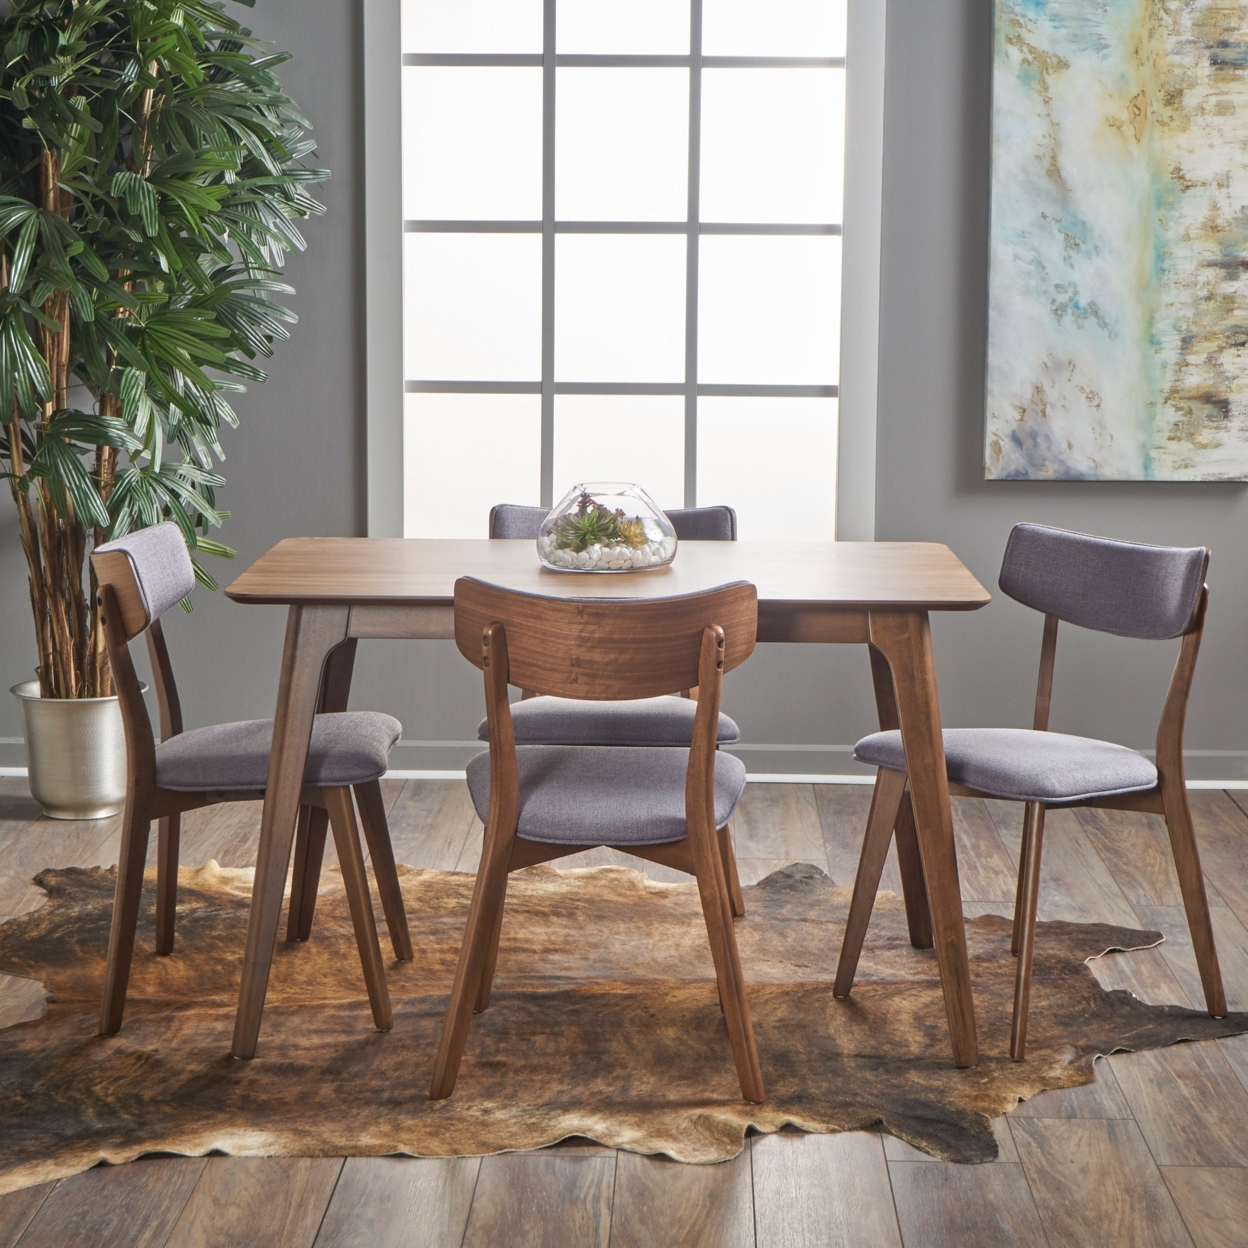 Mango Mid Century Finished 5 Piece Wood Dining Set With Fabric Chairs - Dark Gray